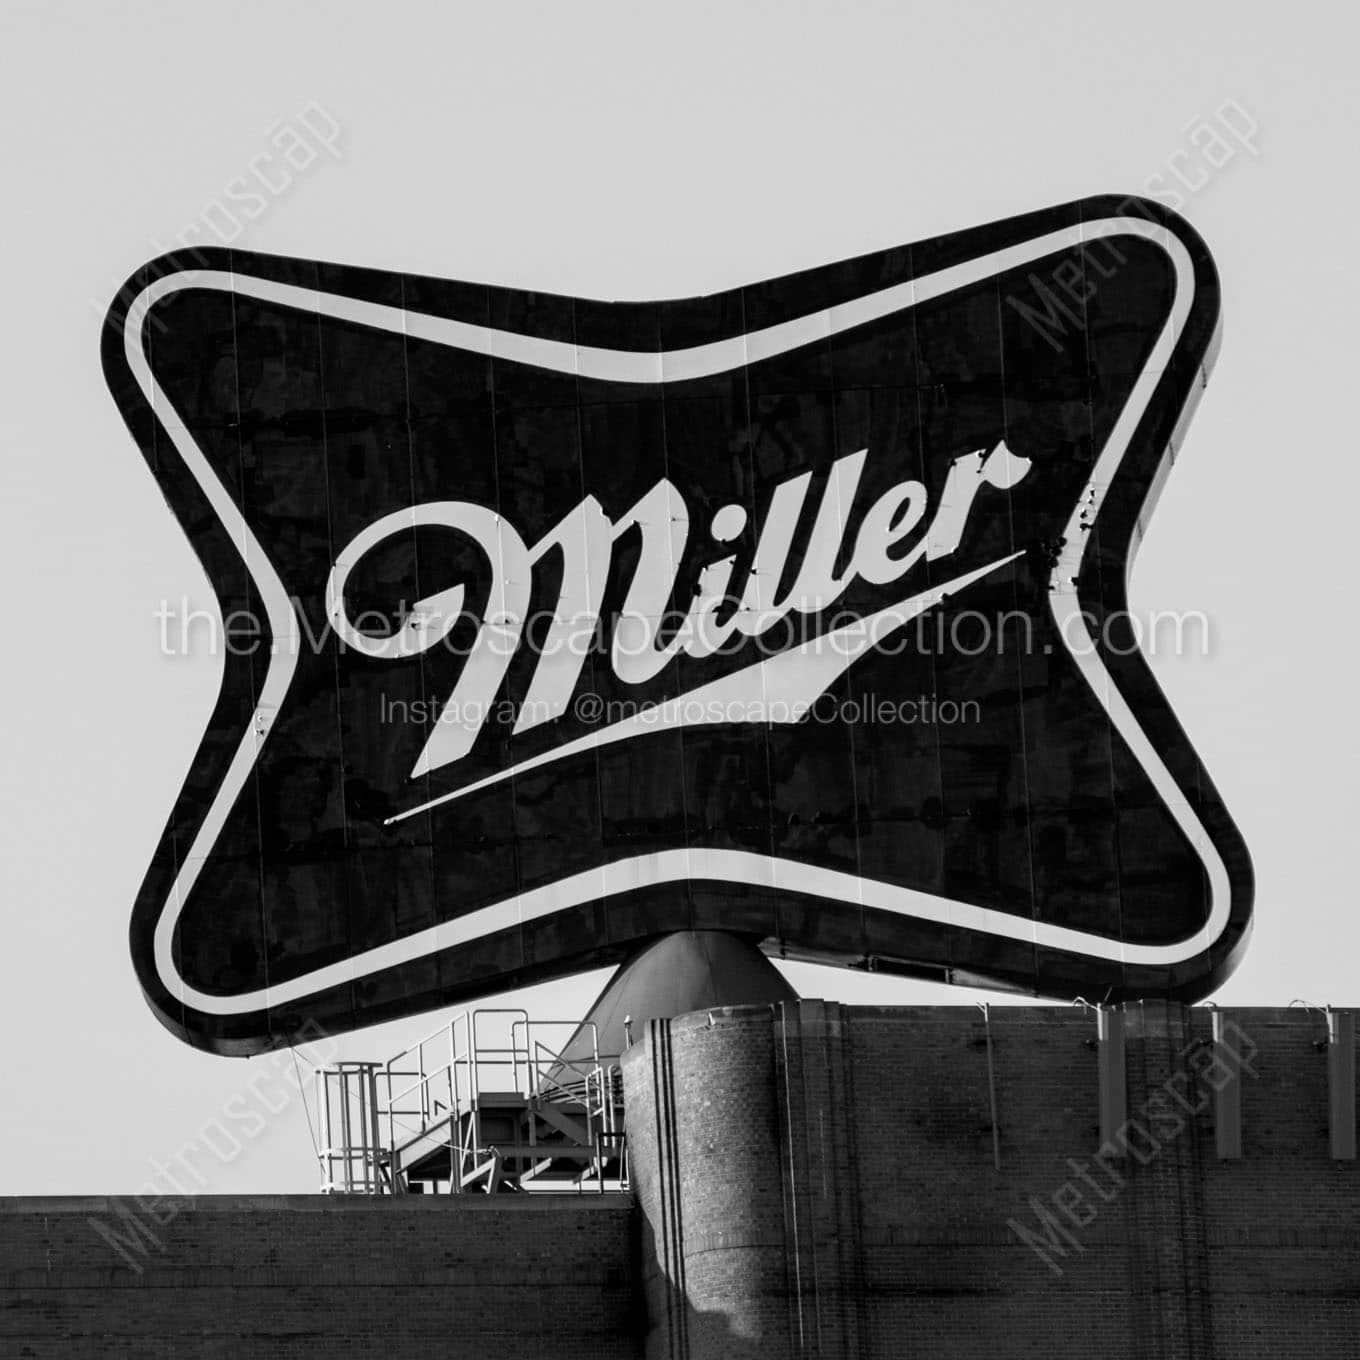 miller brewery sign Black & White Wall Art